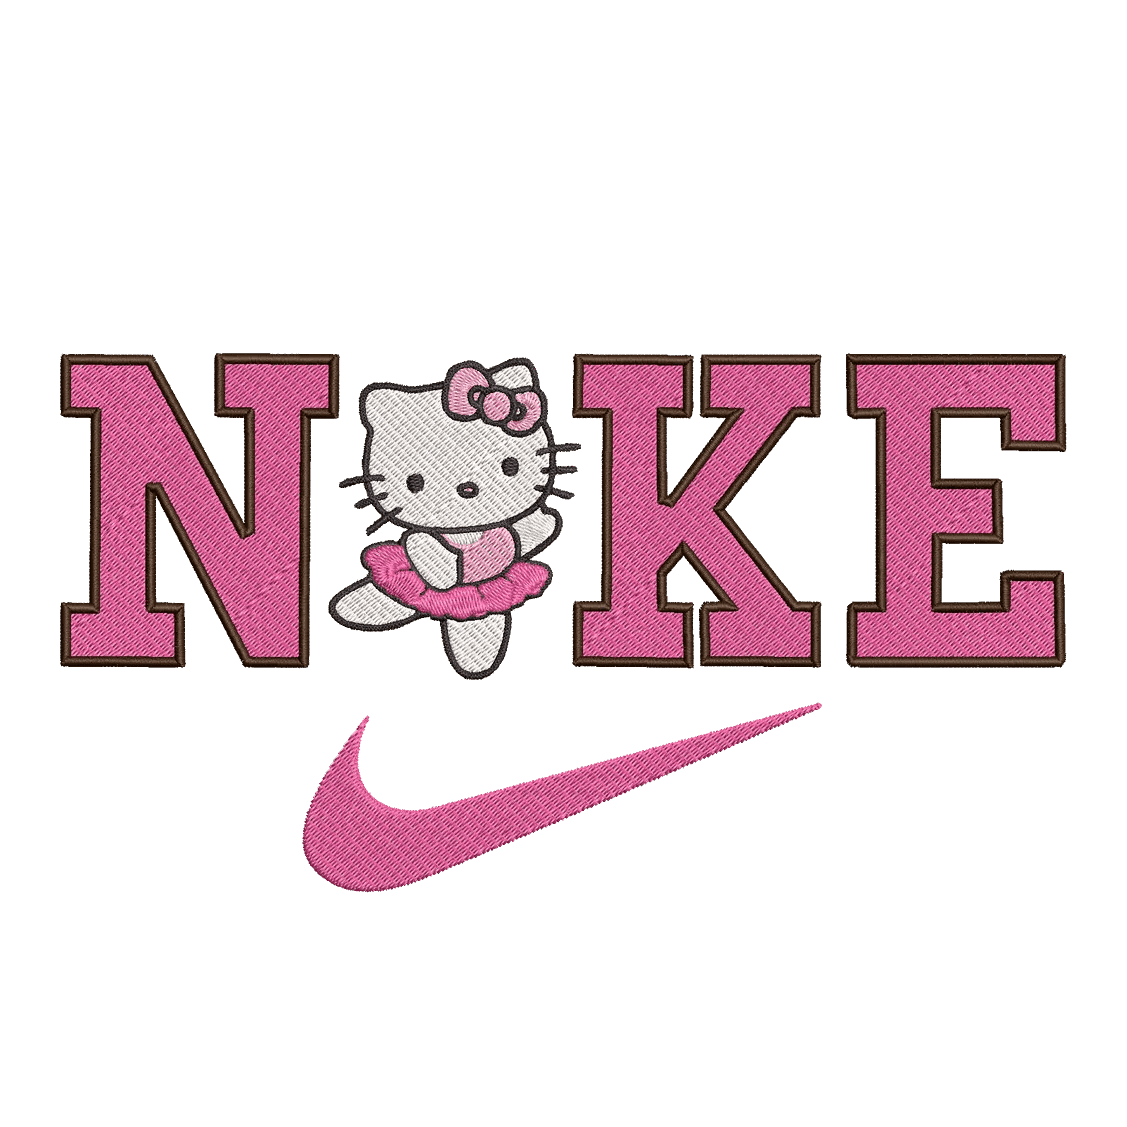 Nike and Hello Kitty 5 - Embroidery Design - FineryEmbroidery